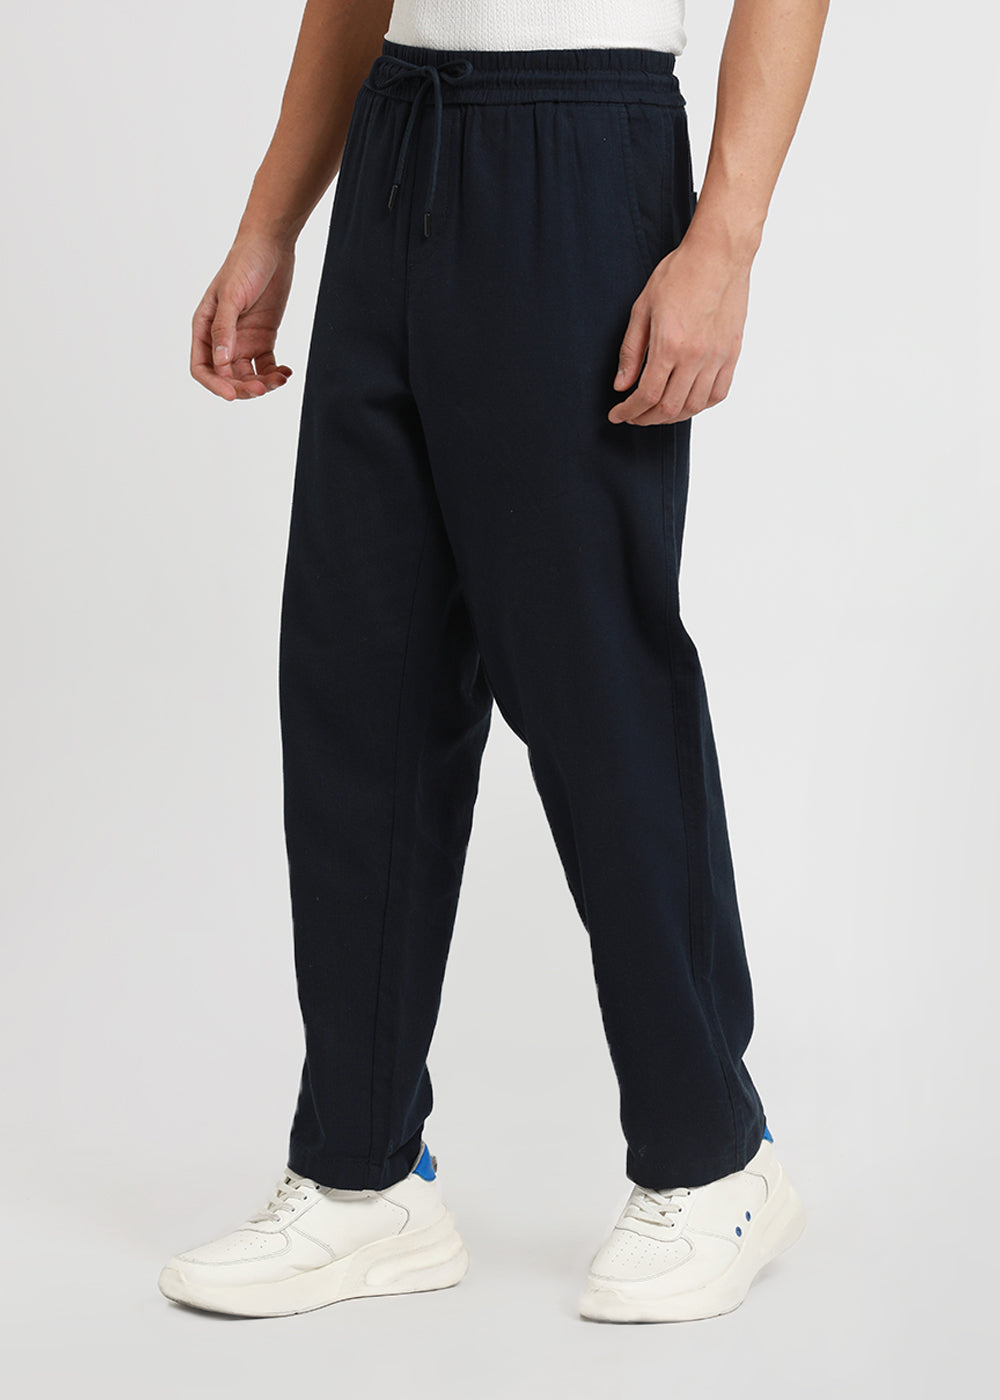 Prussian Blue Textured Pants